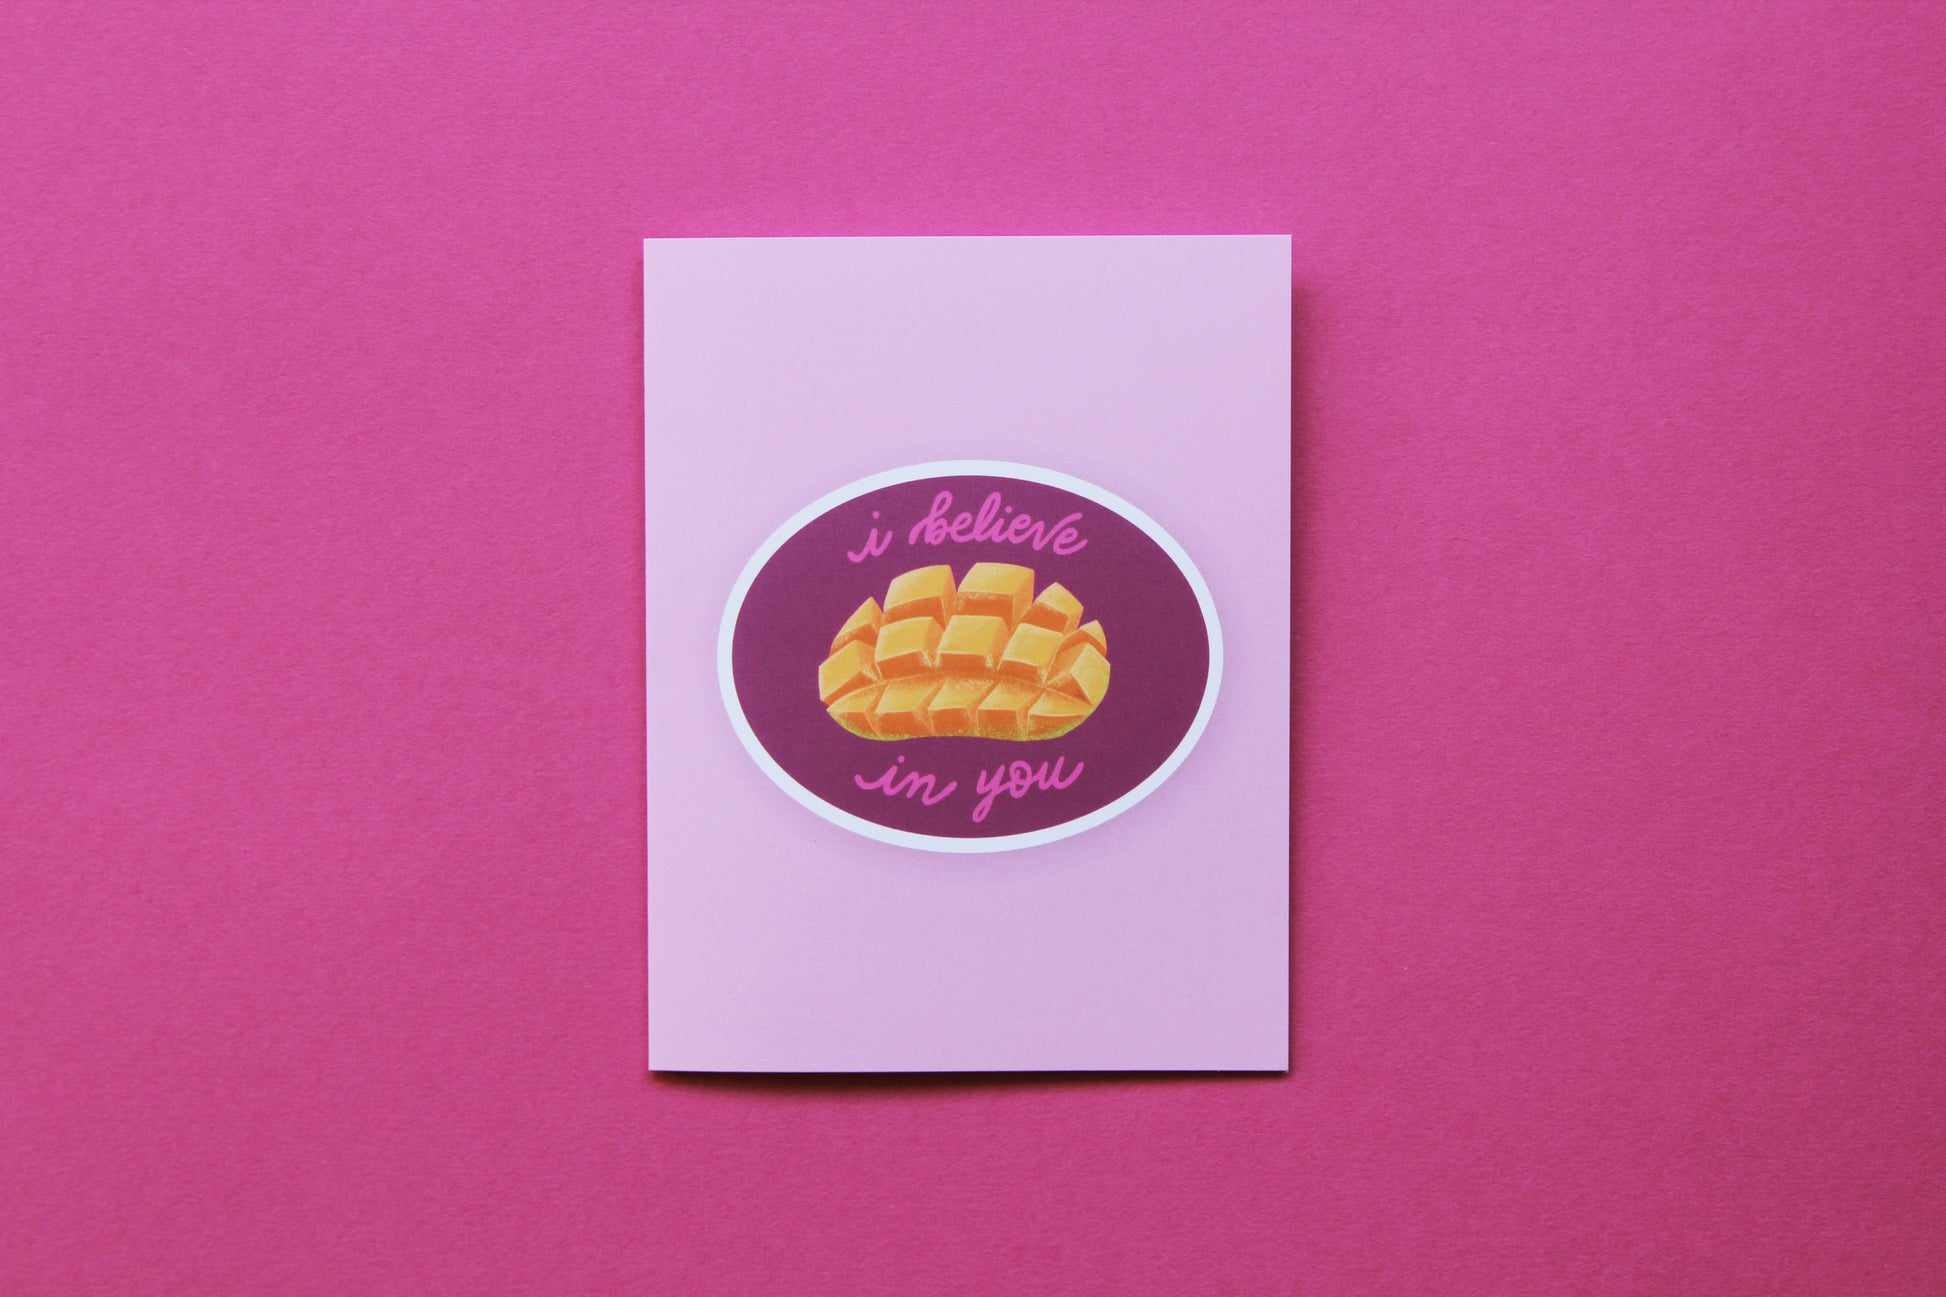 A photo of a pink greeting card with a sliced mango that says "I believe in you" on a pink background.